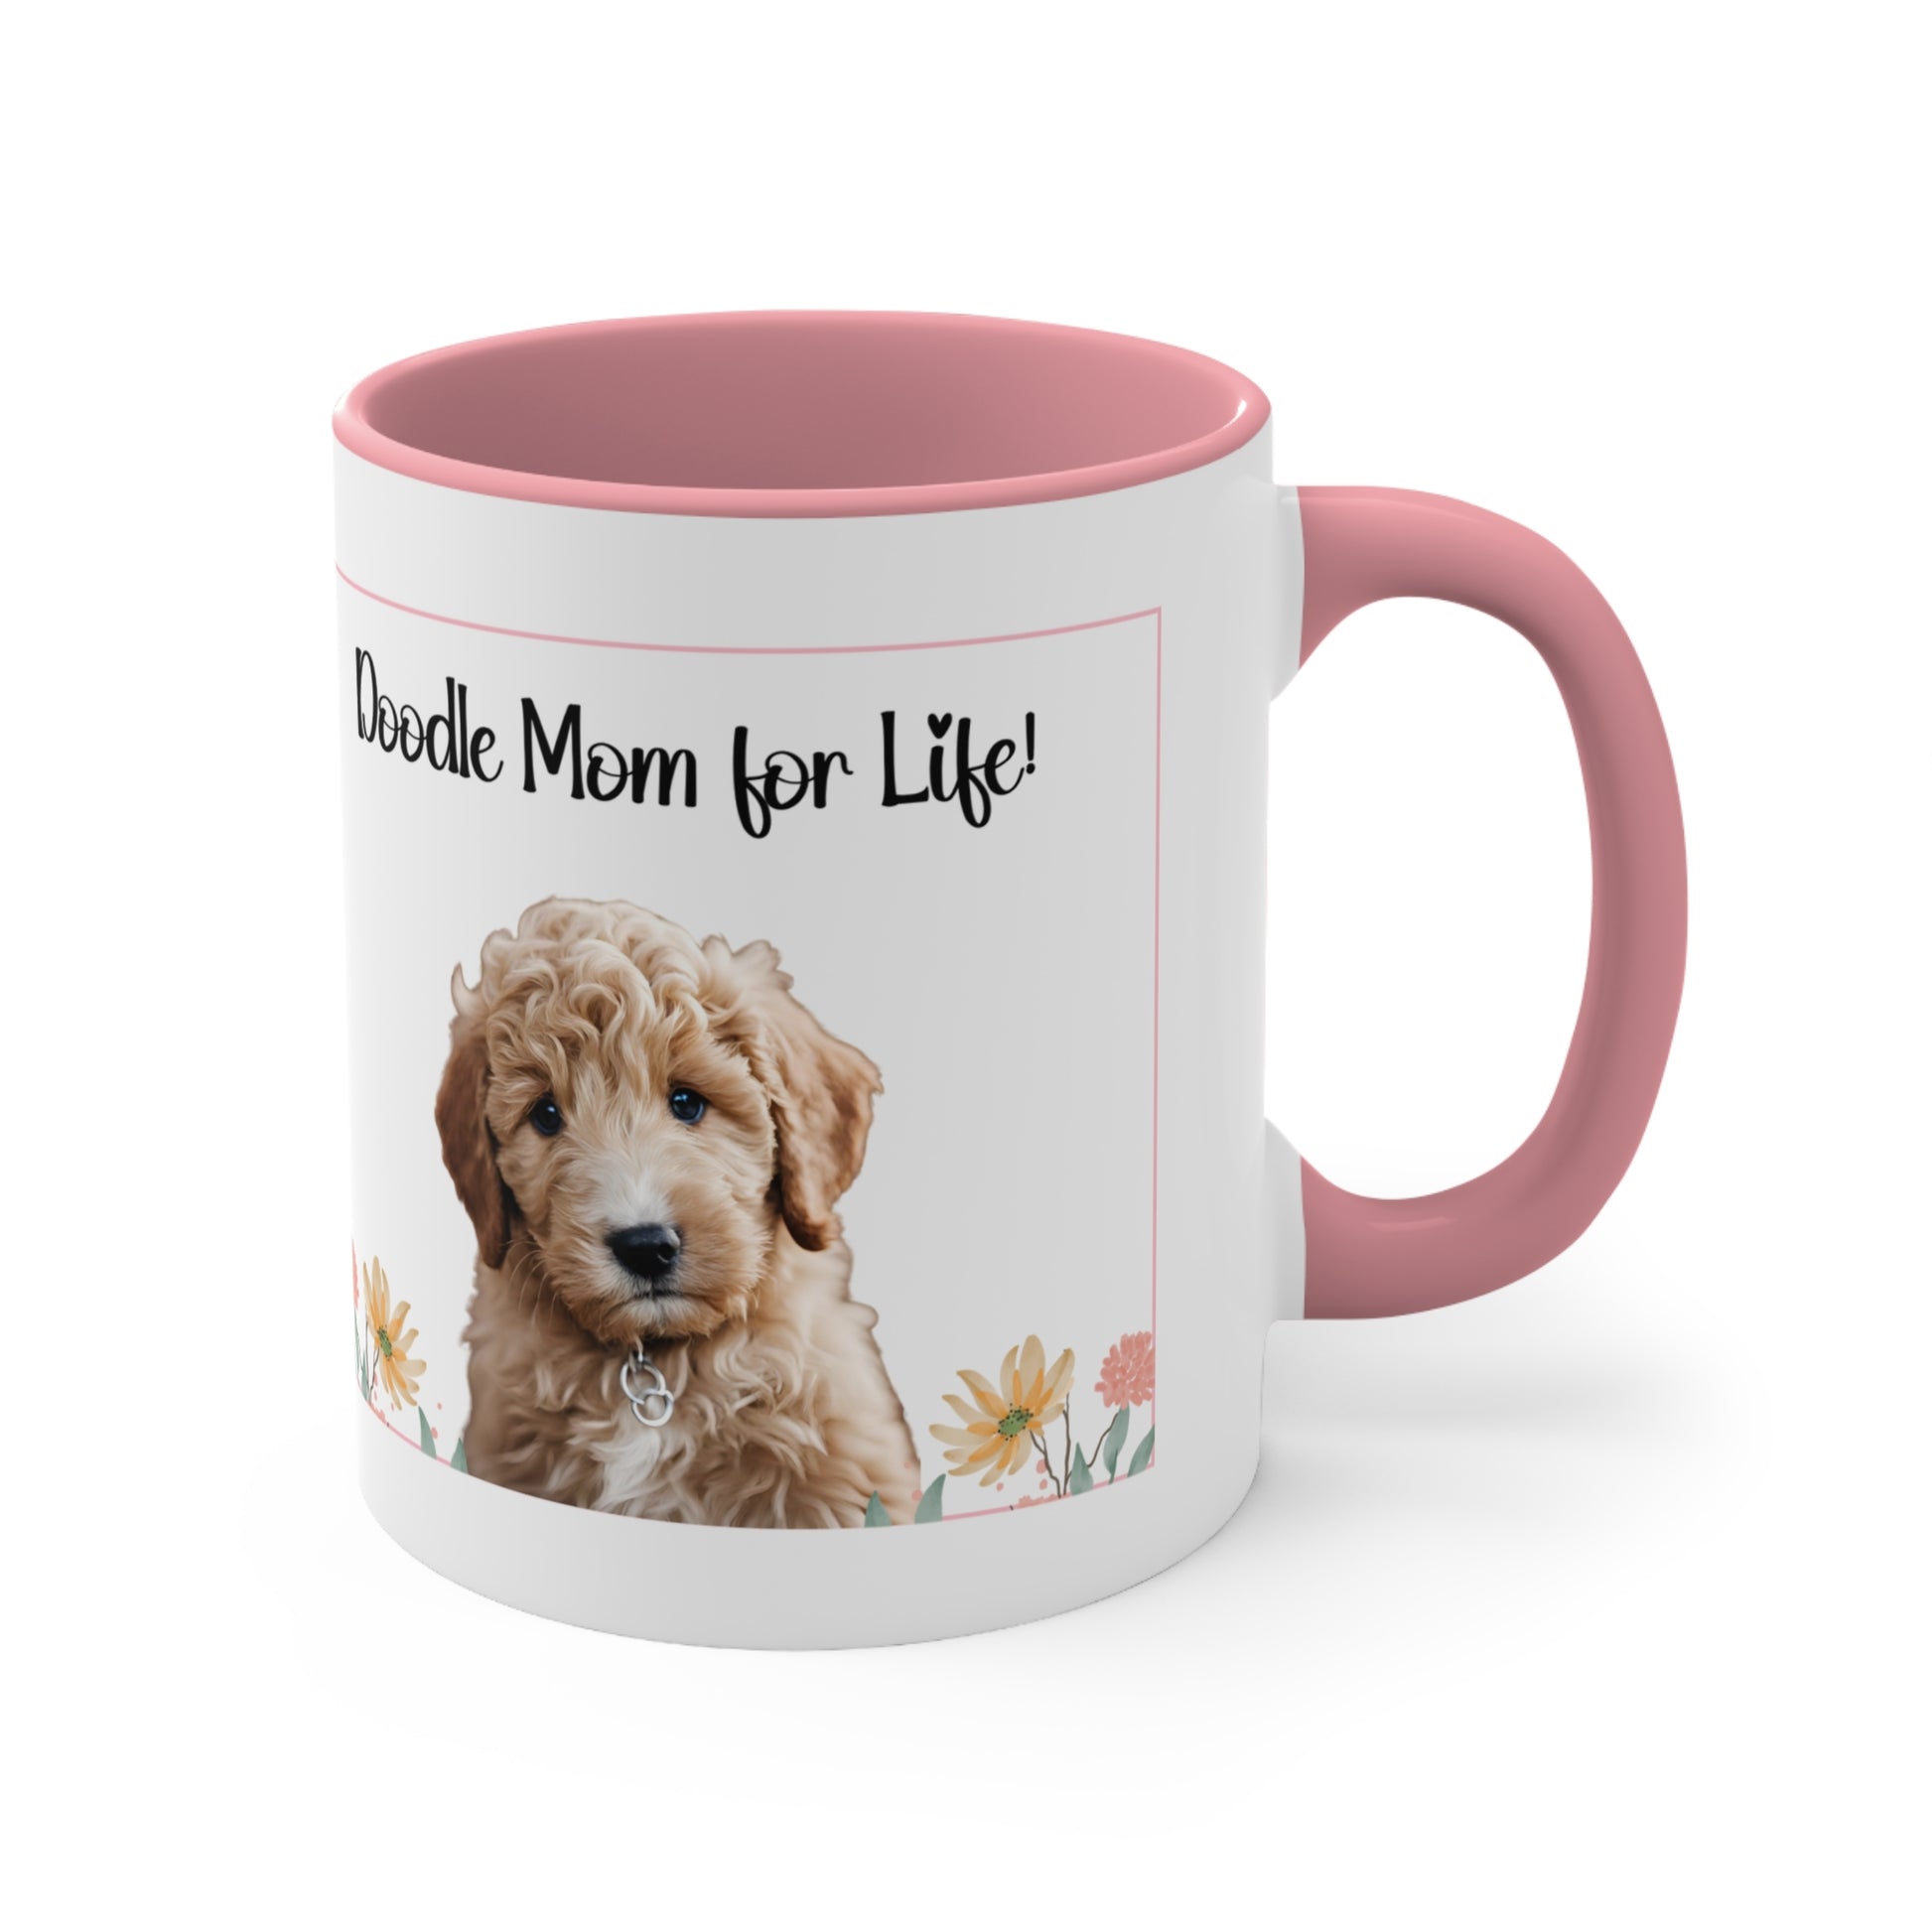 Golden doodle coffee mug, 11 oz hor gift or self, front view in pink.